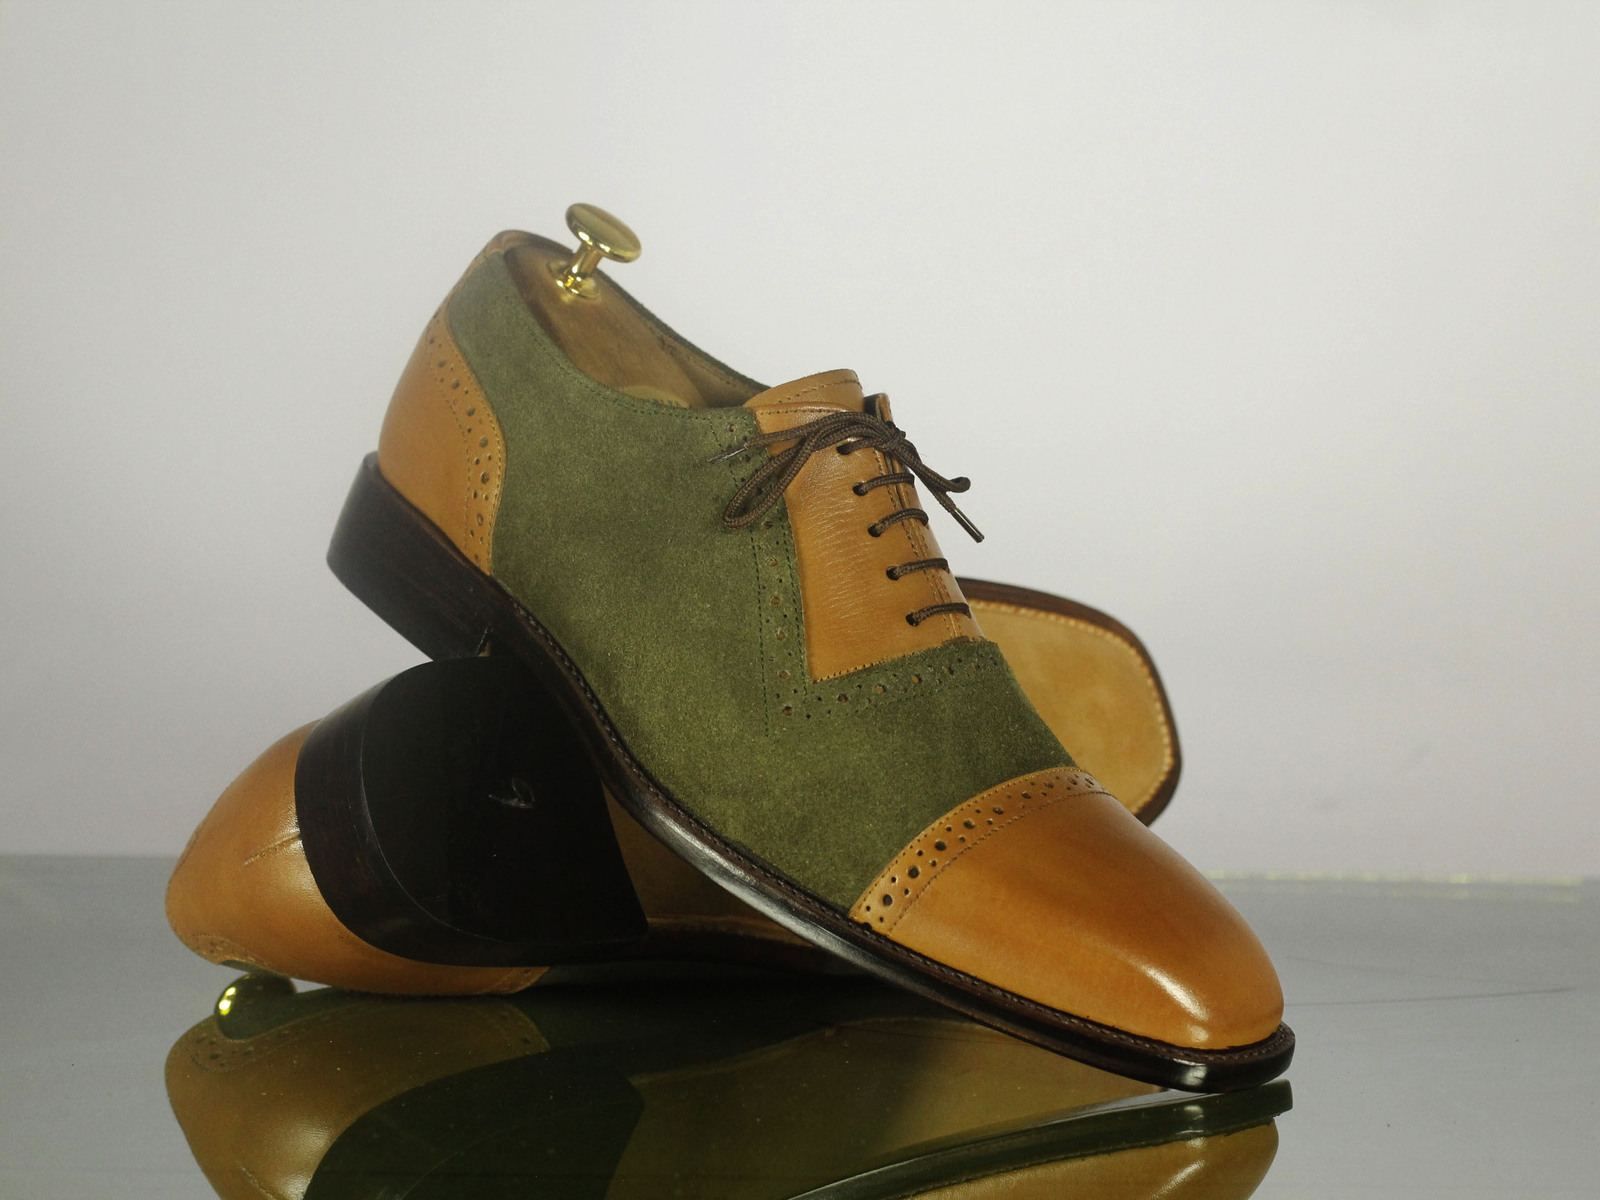 Hand Crafted Men's Tan Green Leather Suede Shoes, Stylish Bespoke Dress ...